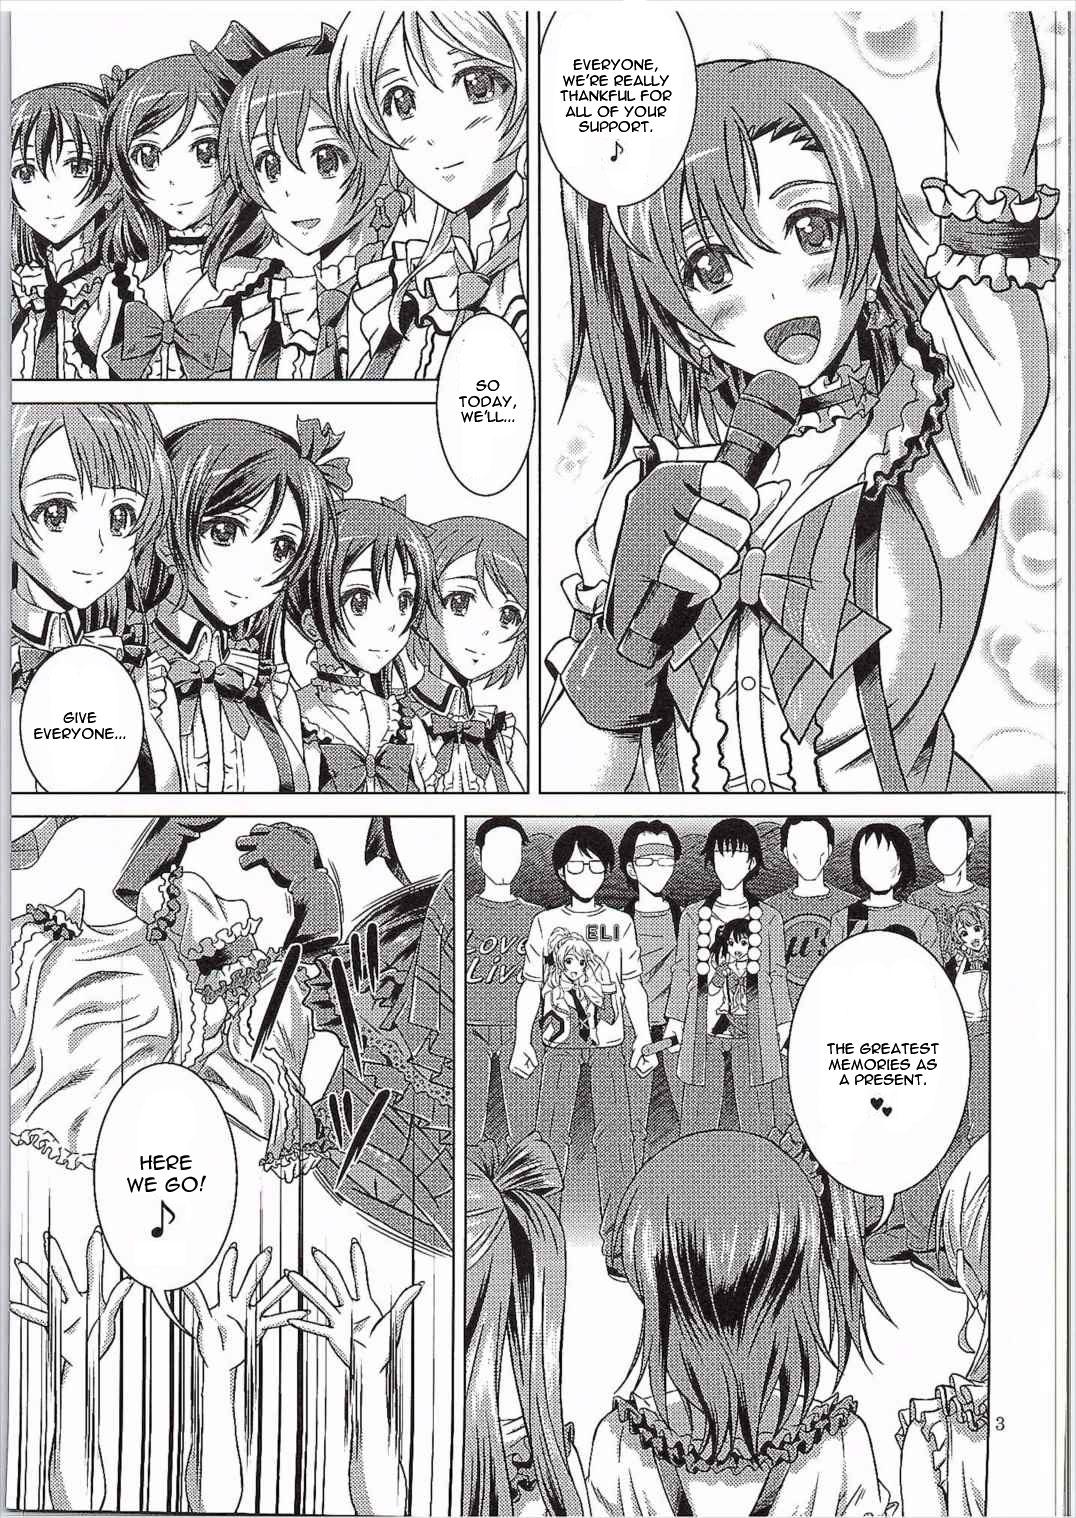 18 Year Old Bakobako Live! - Love live Private - Page 2